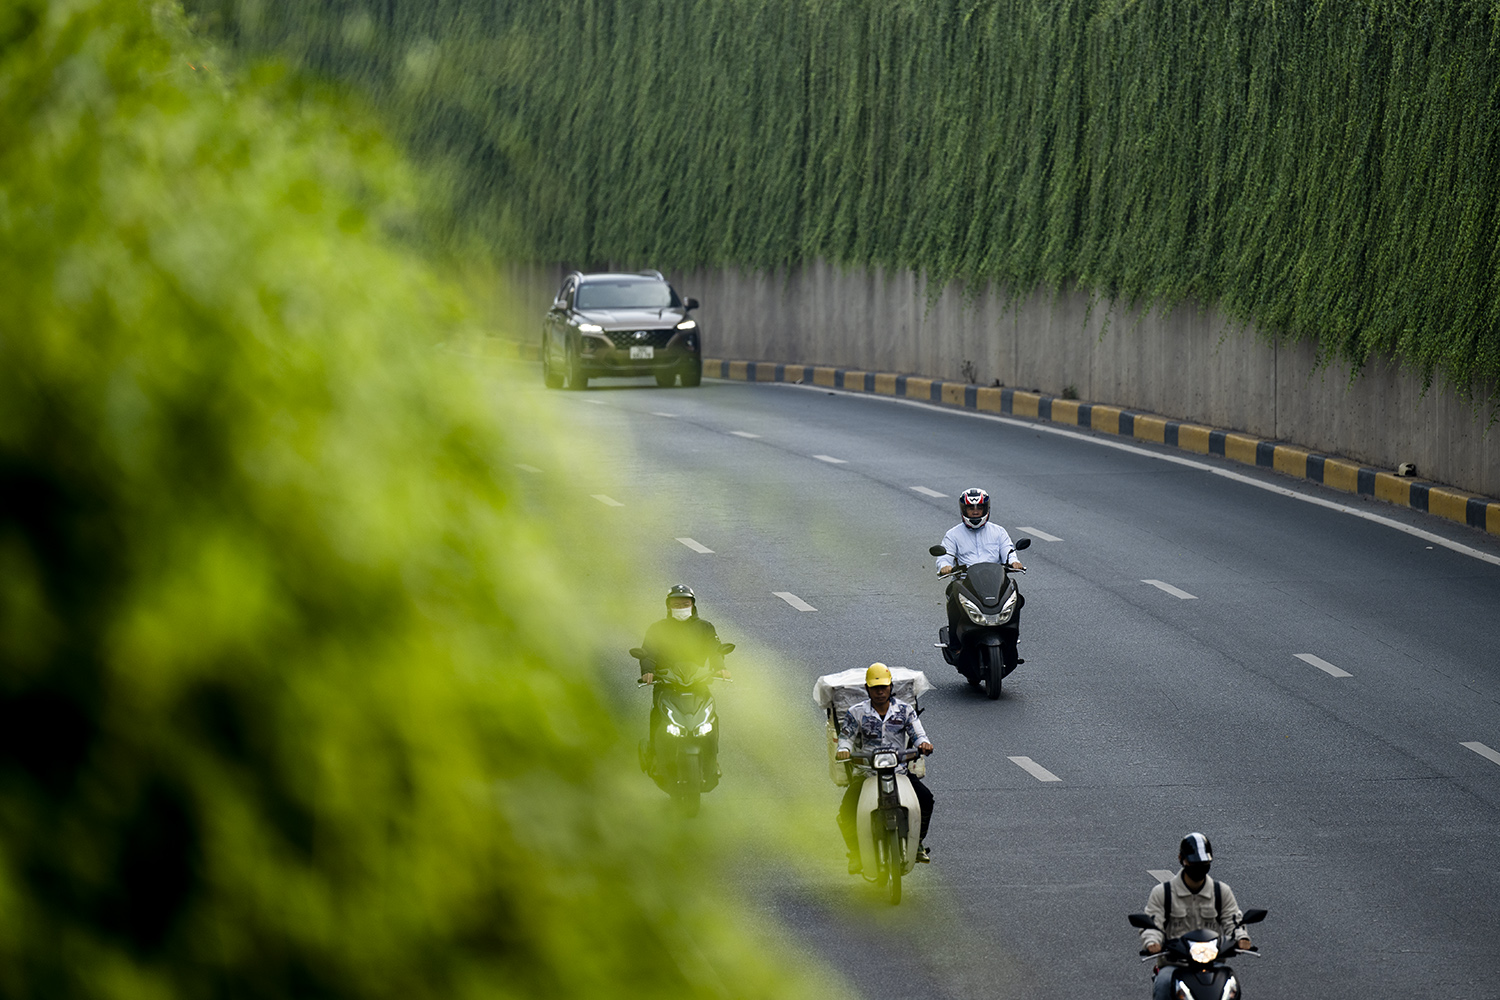 The road covered with picturesque vines in the heart of Hanoi - 7